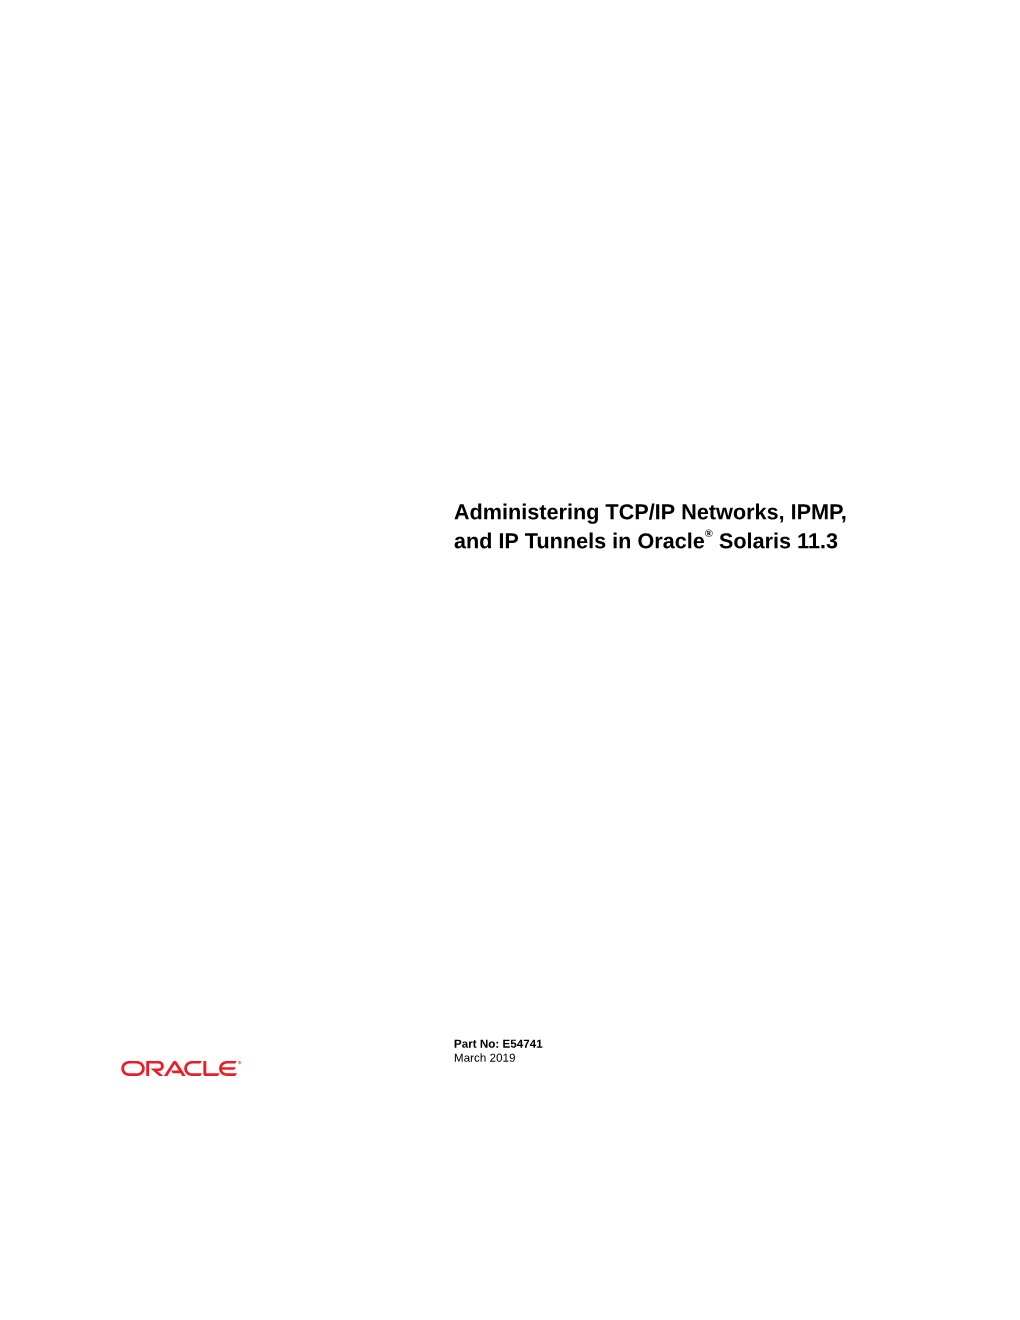 Administering TCP/IP Networks, IPMP, and IP Tunnels in Oracle Solaris 11.3 Part No: E54741 Copyright © 2011, 2019, Oracle And/Or Its Affiliates